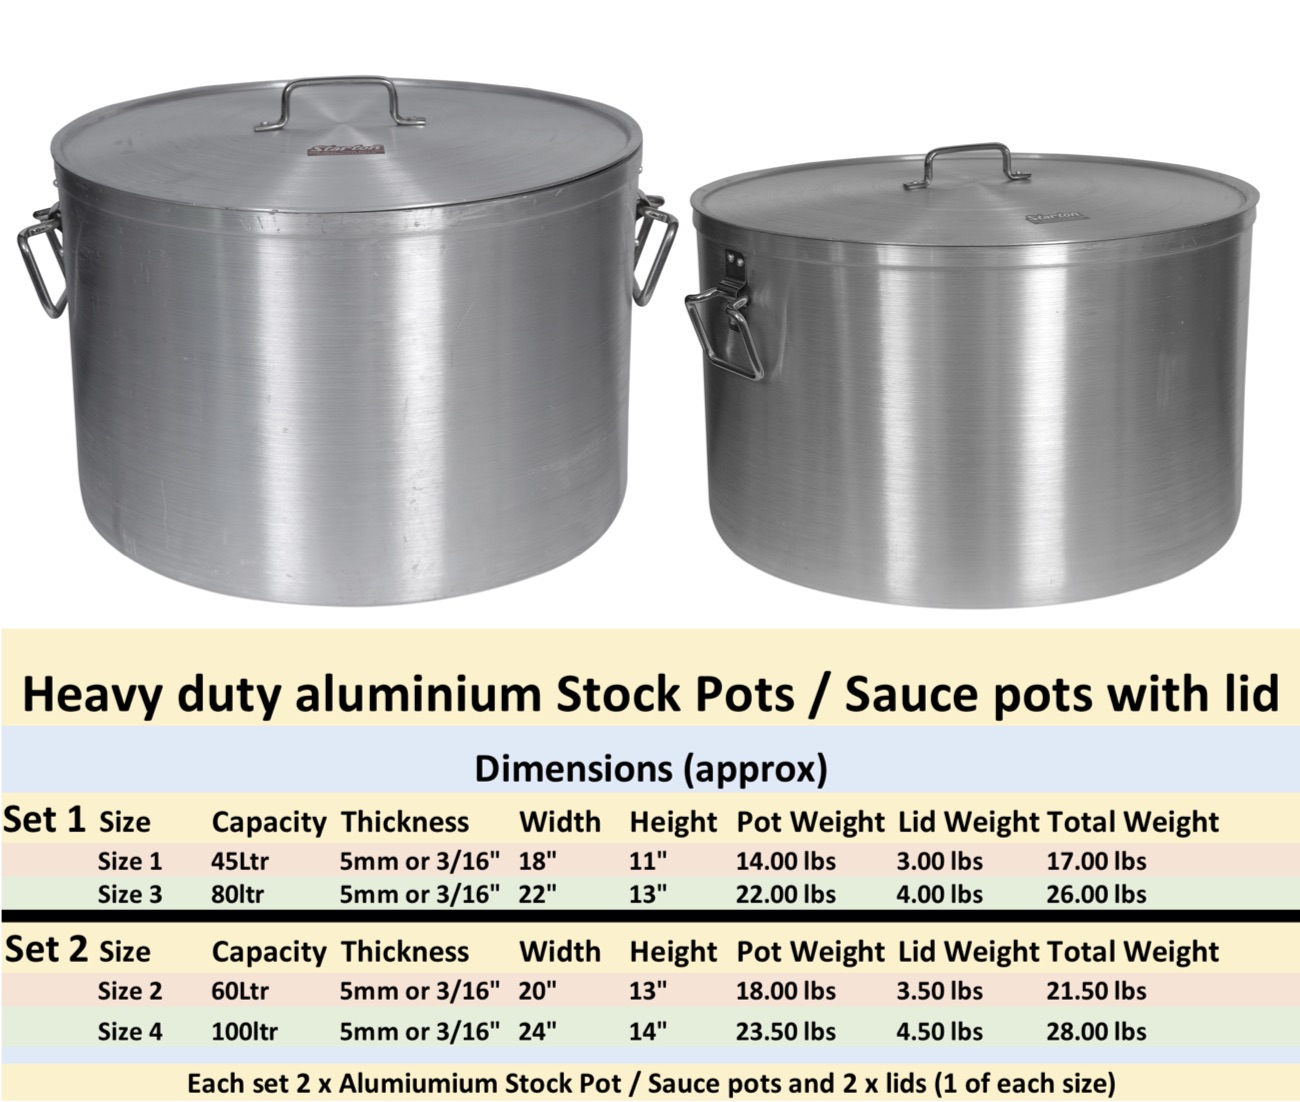 https://www.desiclik.com/images/D/Stock%20pots%20with%20pic%20and%20dimensions.jpg